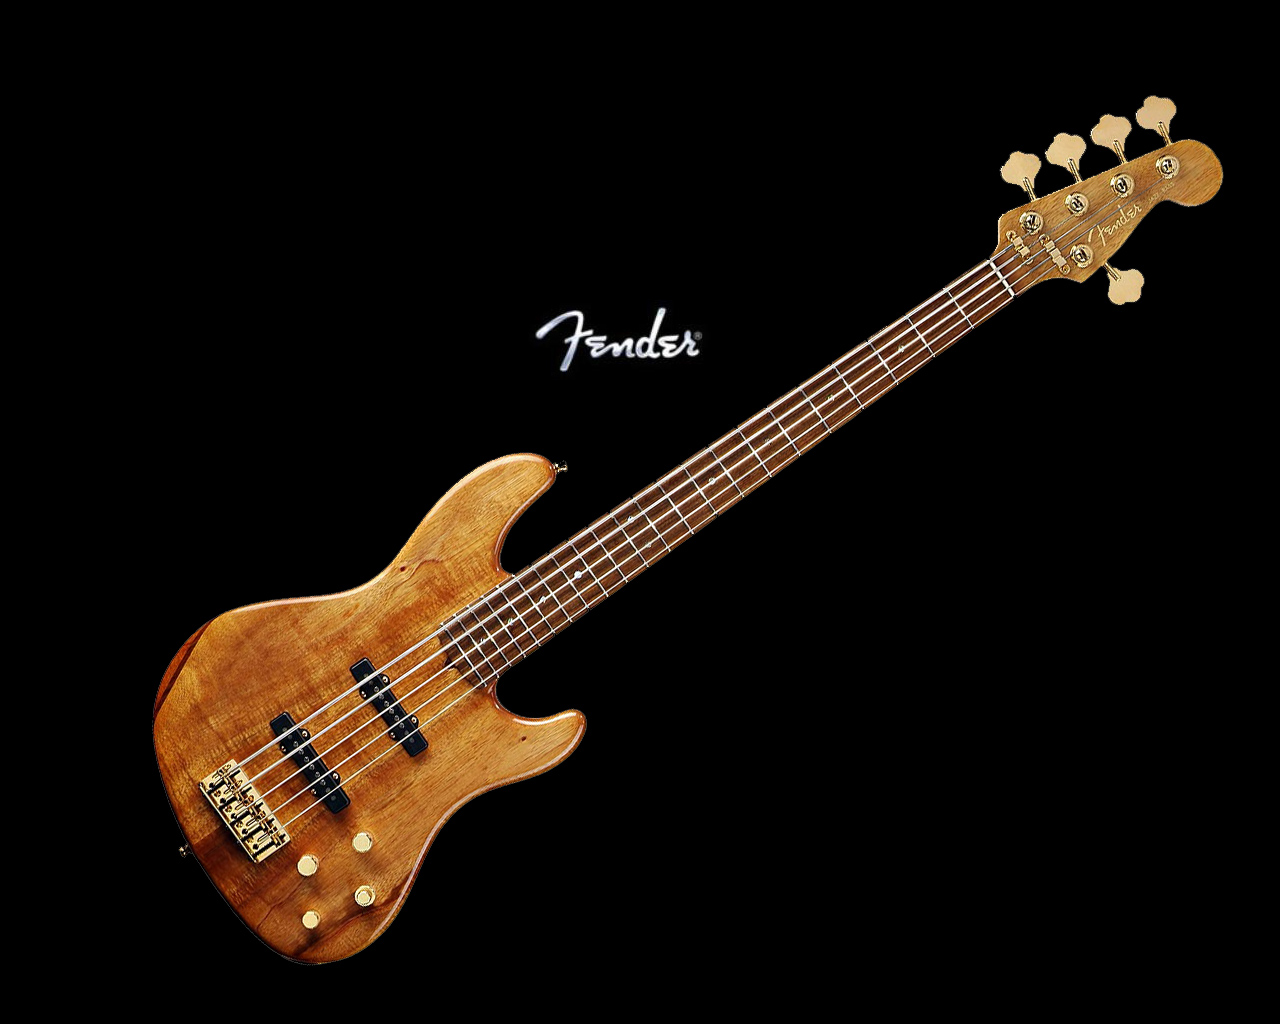 Fender Victor Bailey Jazz Bass V Music Picture HD Wallpaper Background